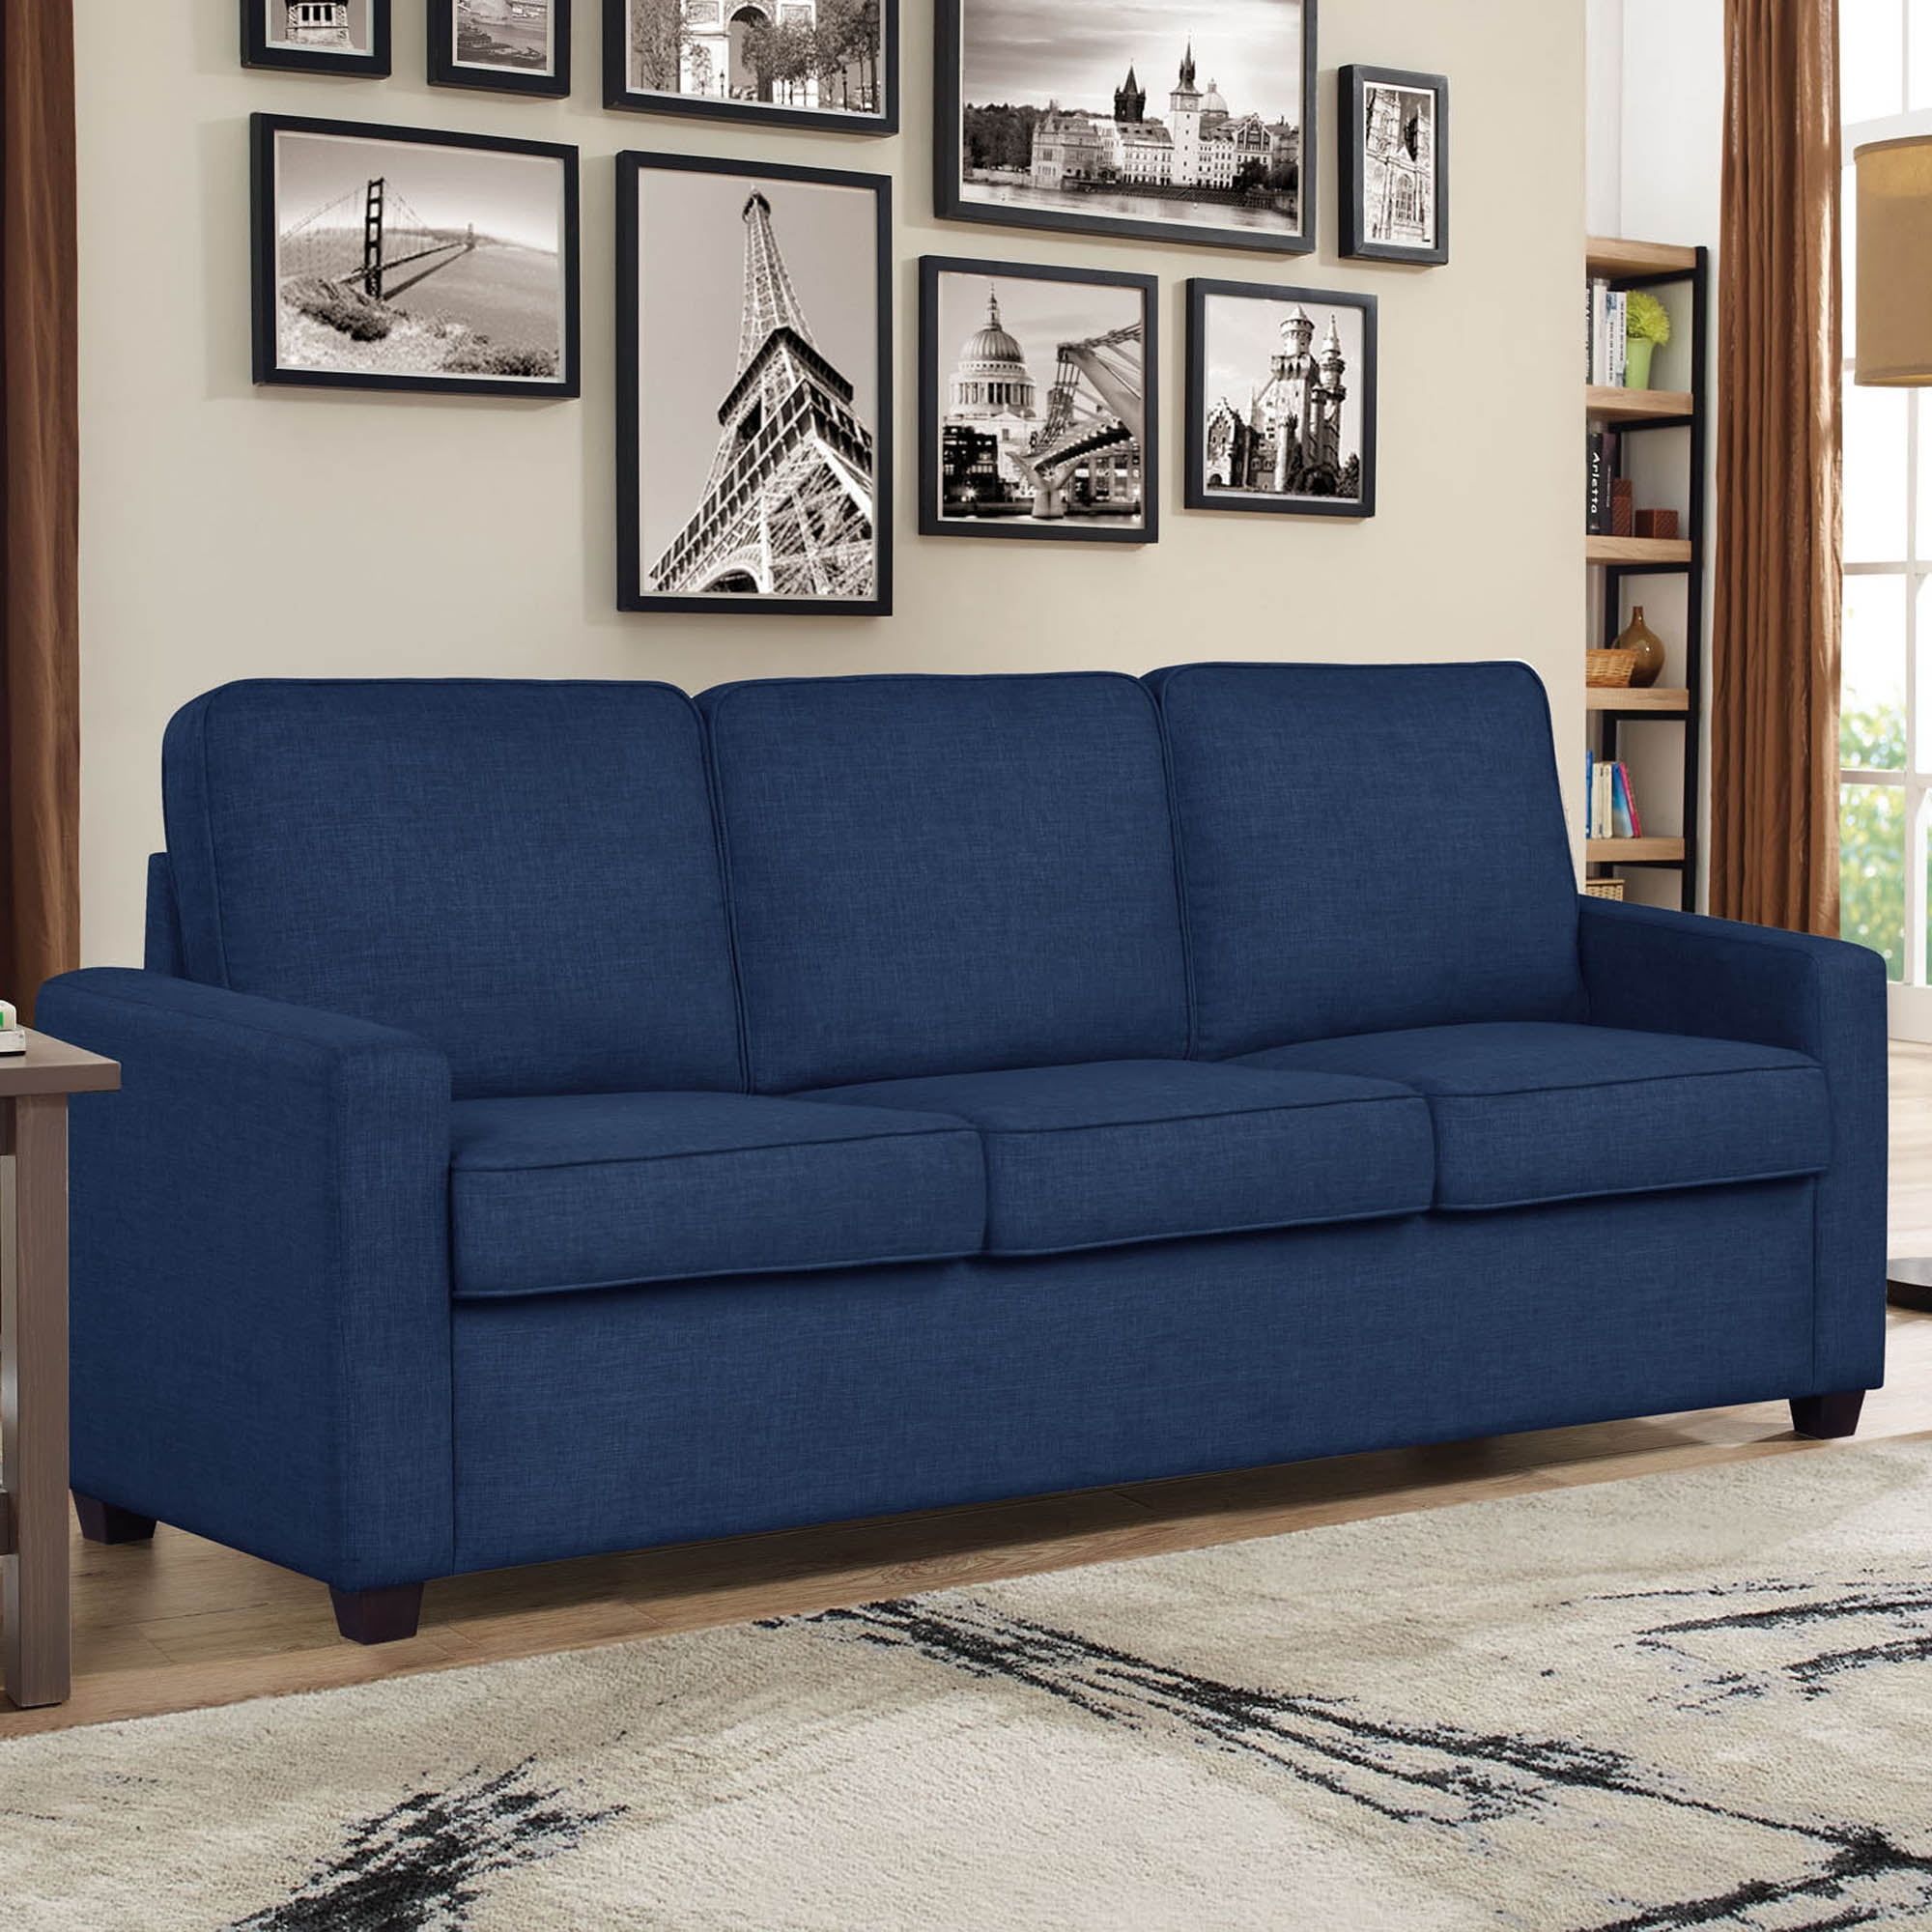 Lifestyle Solutions Jenson Traditional Sofa With Sleeper, Navy Blue Fabric  – Walmart For Navy Sleeper Sofa Couches (Photo 1 of 15)